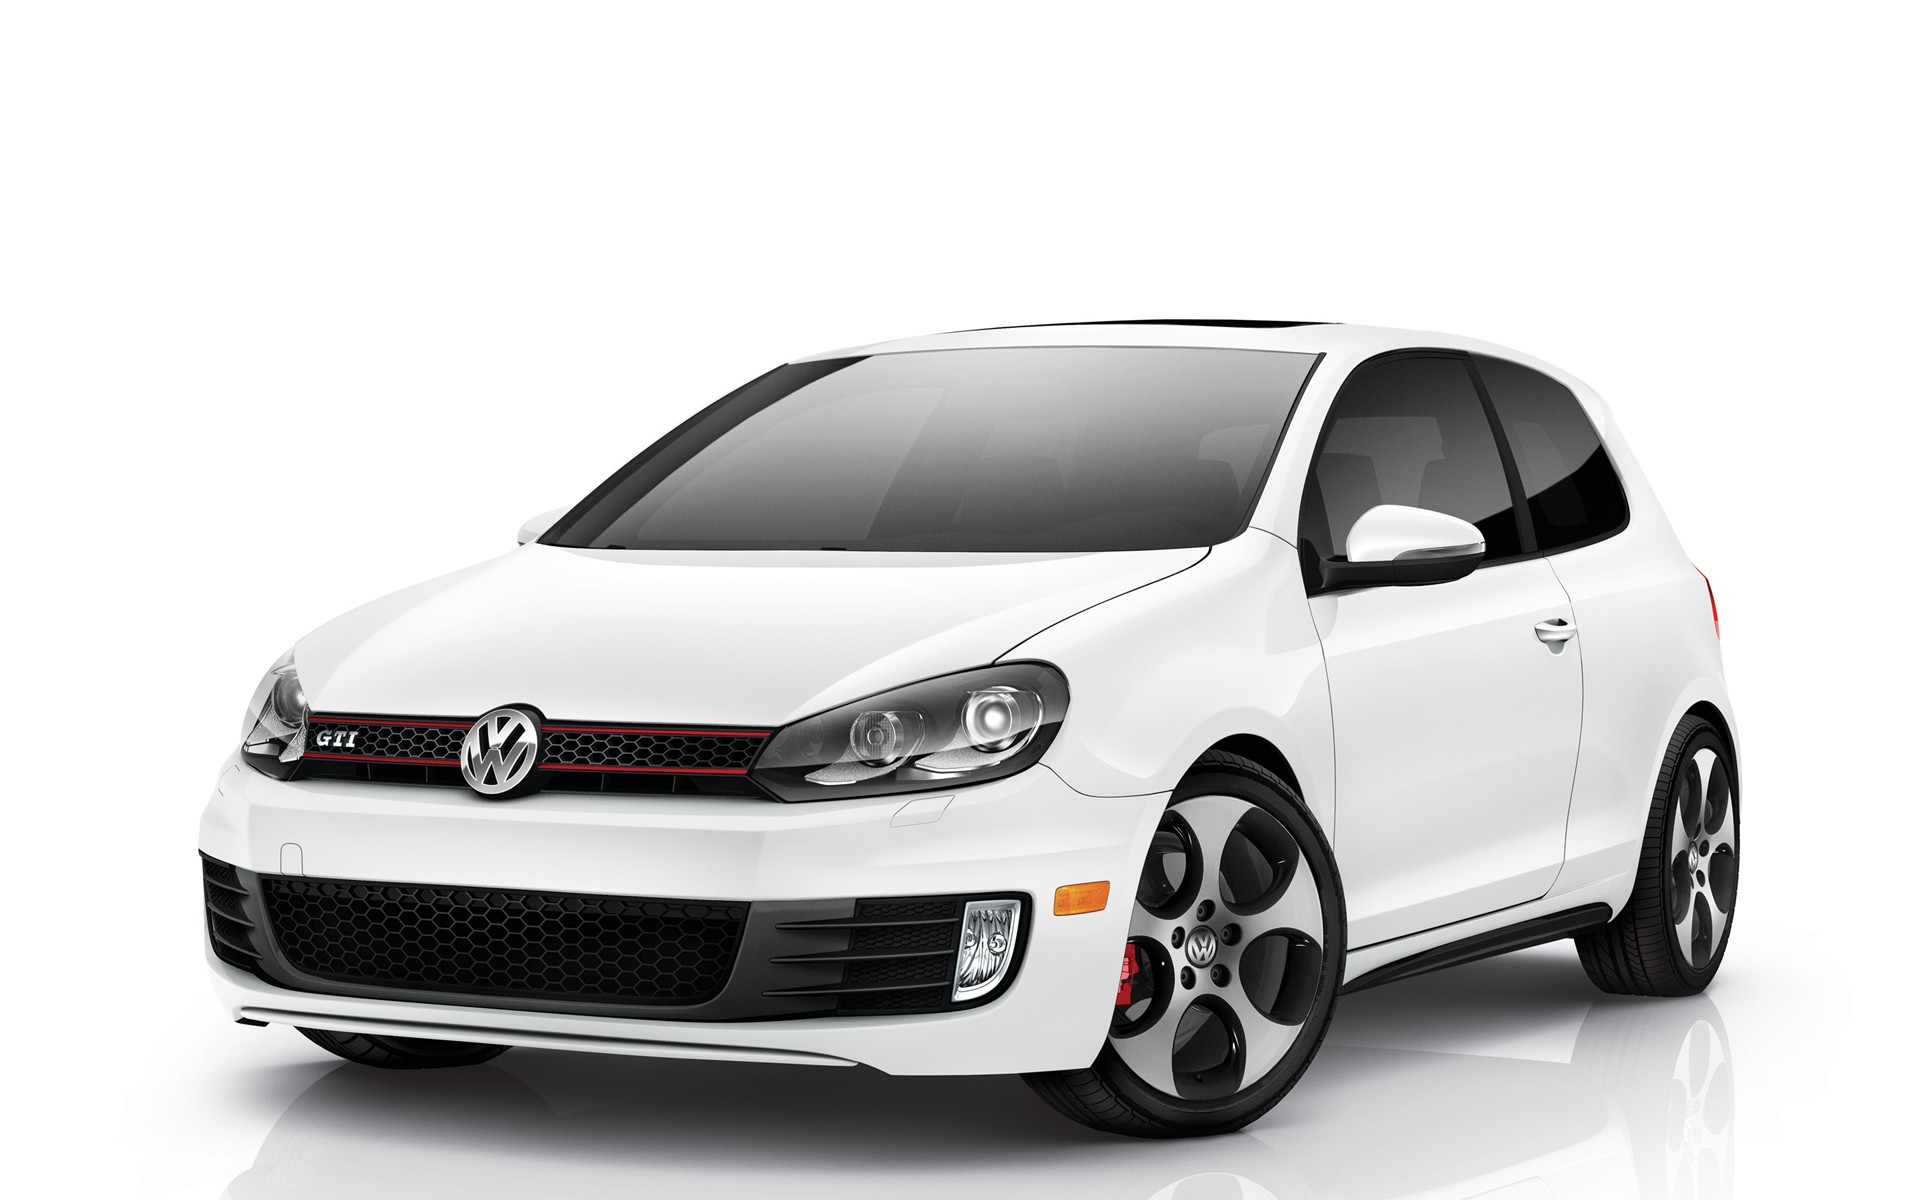 Volkswagen GTI wallpapers and images - wallpapers ...